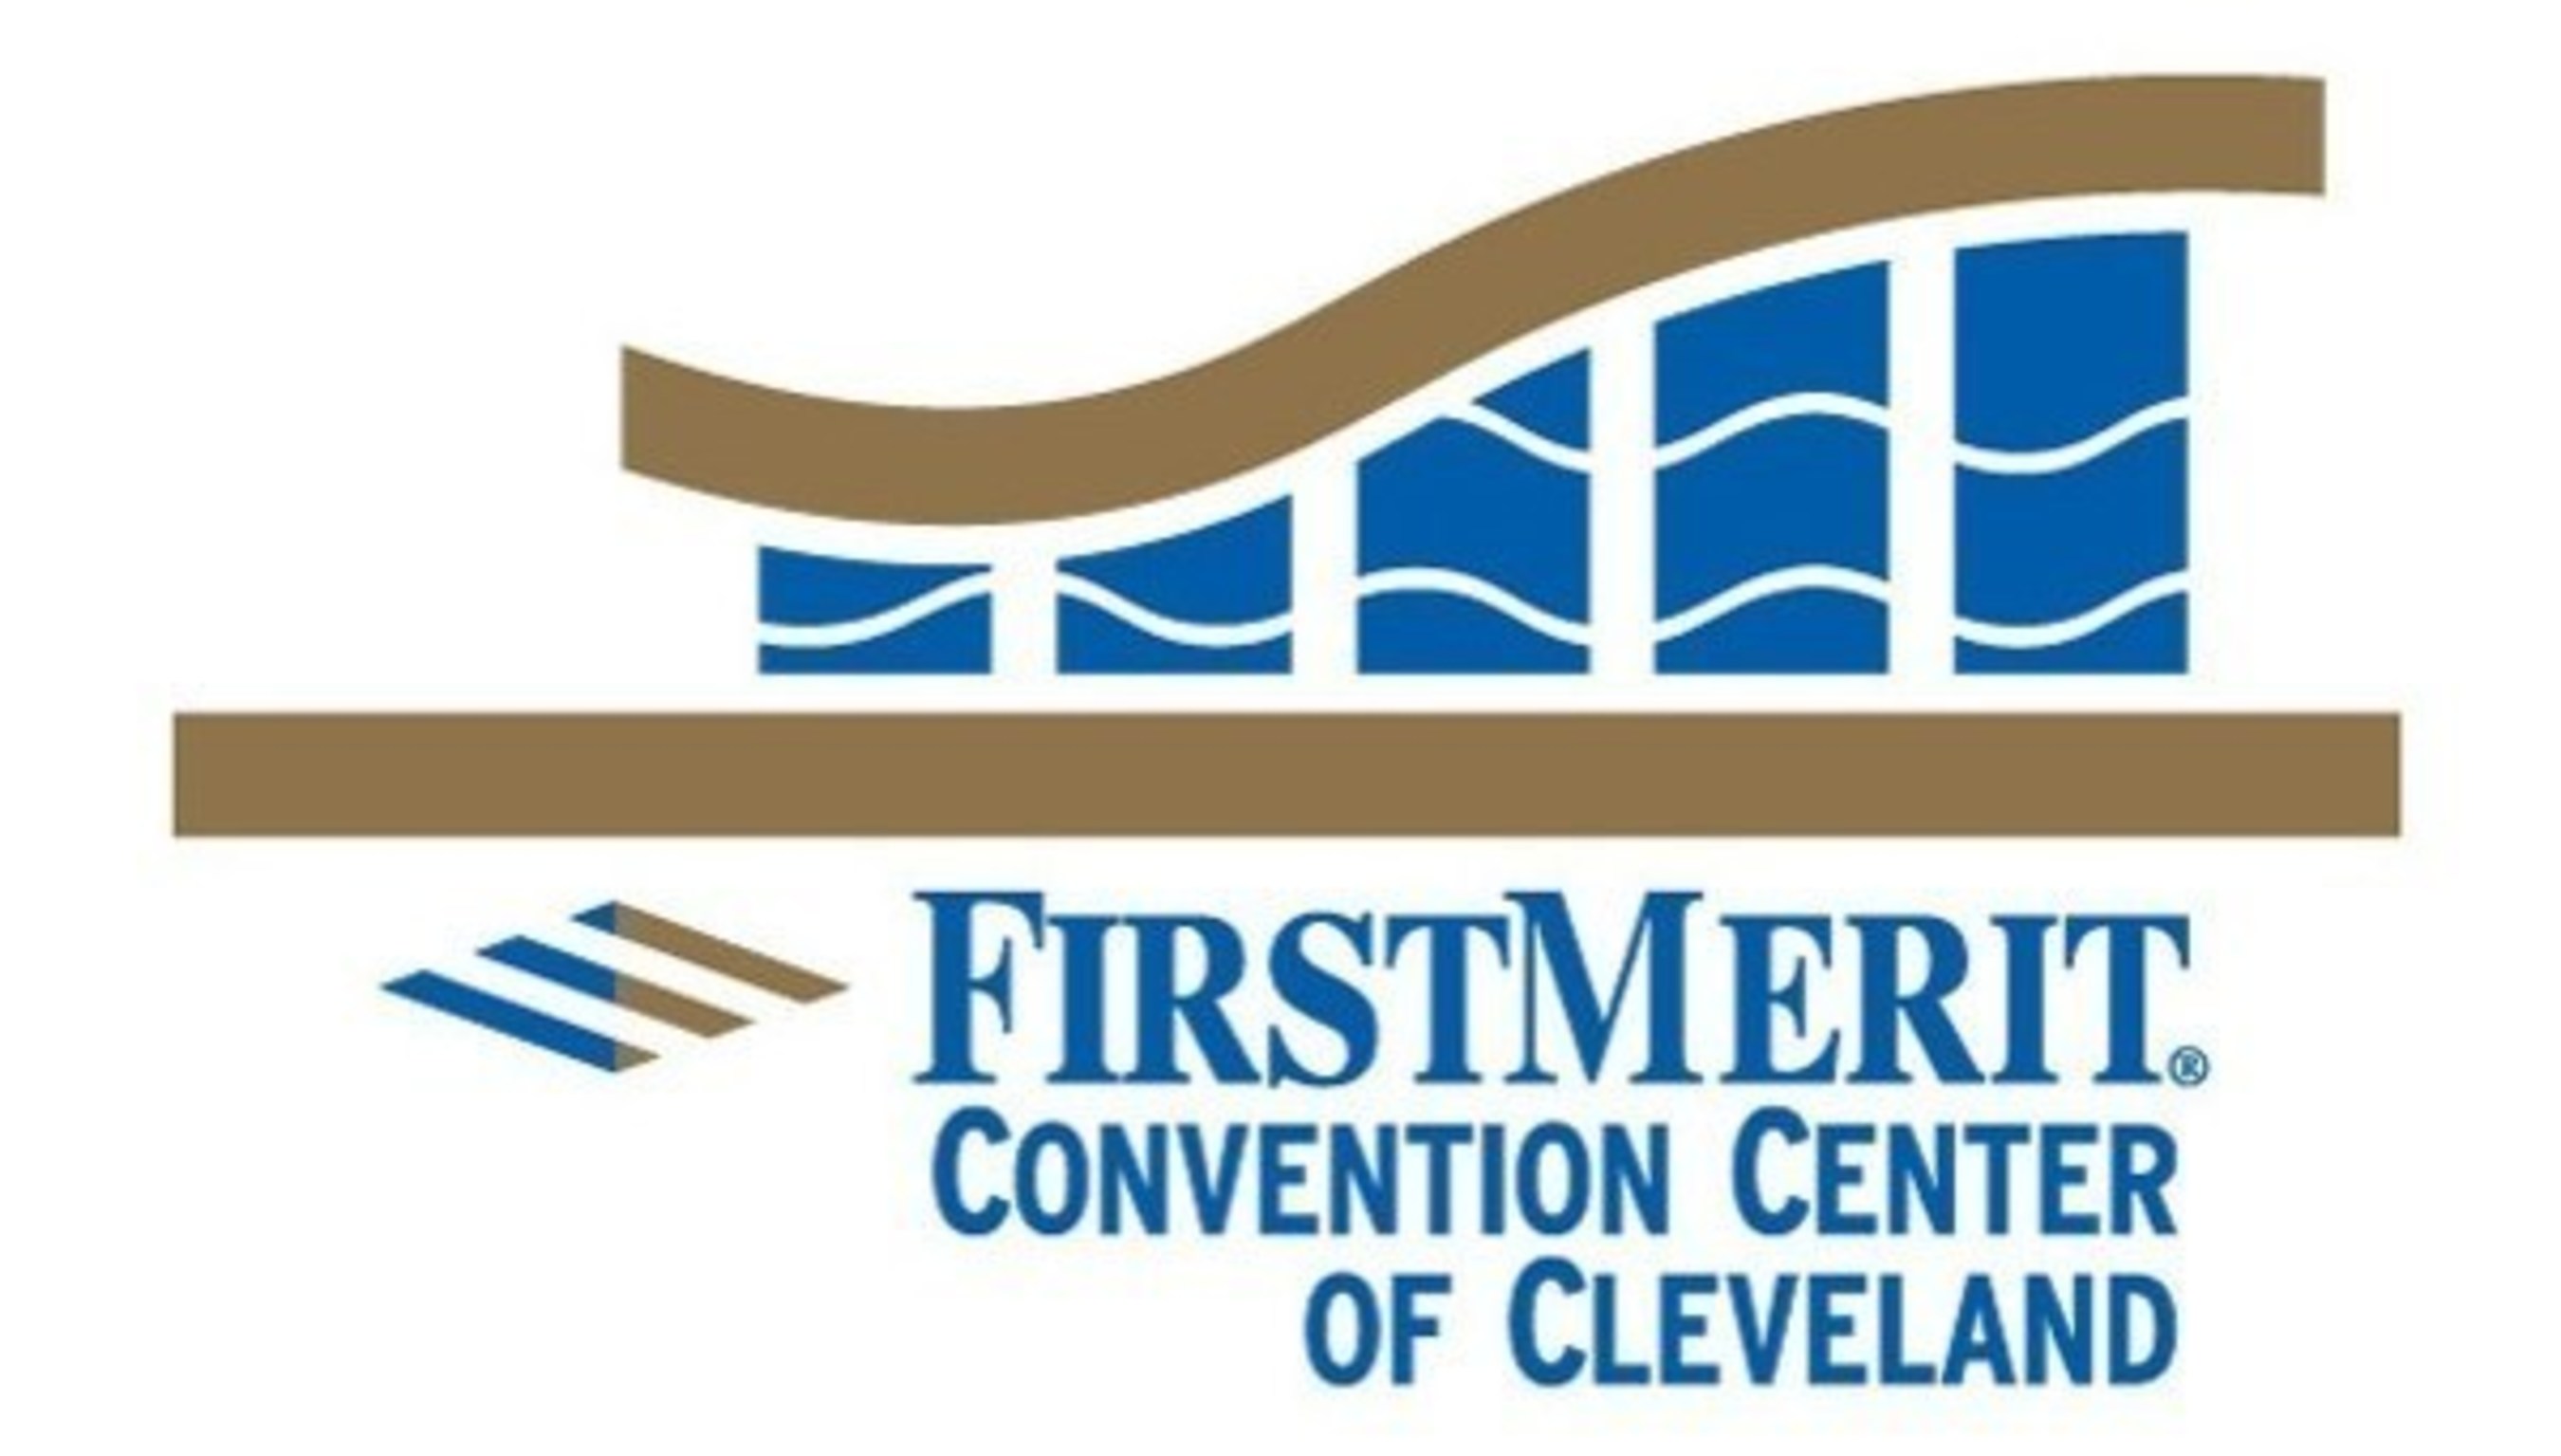 New logo for the FirstMerit Convention Center of Cleveland.